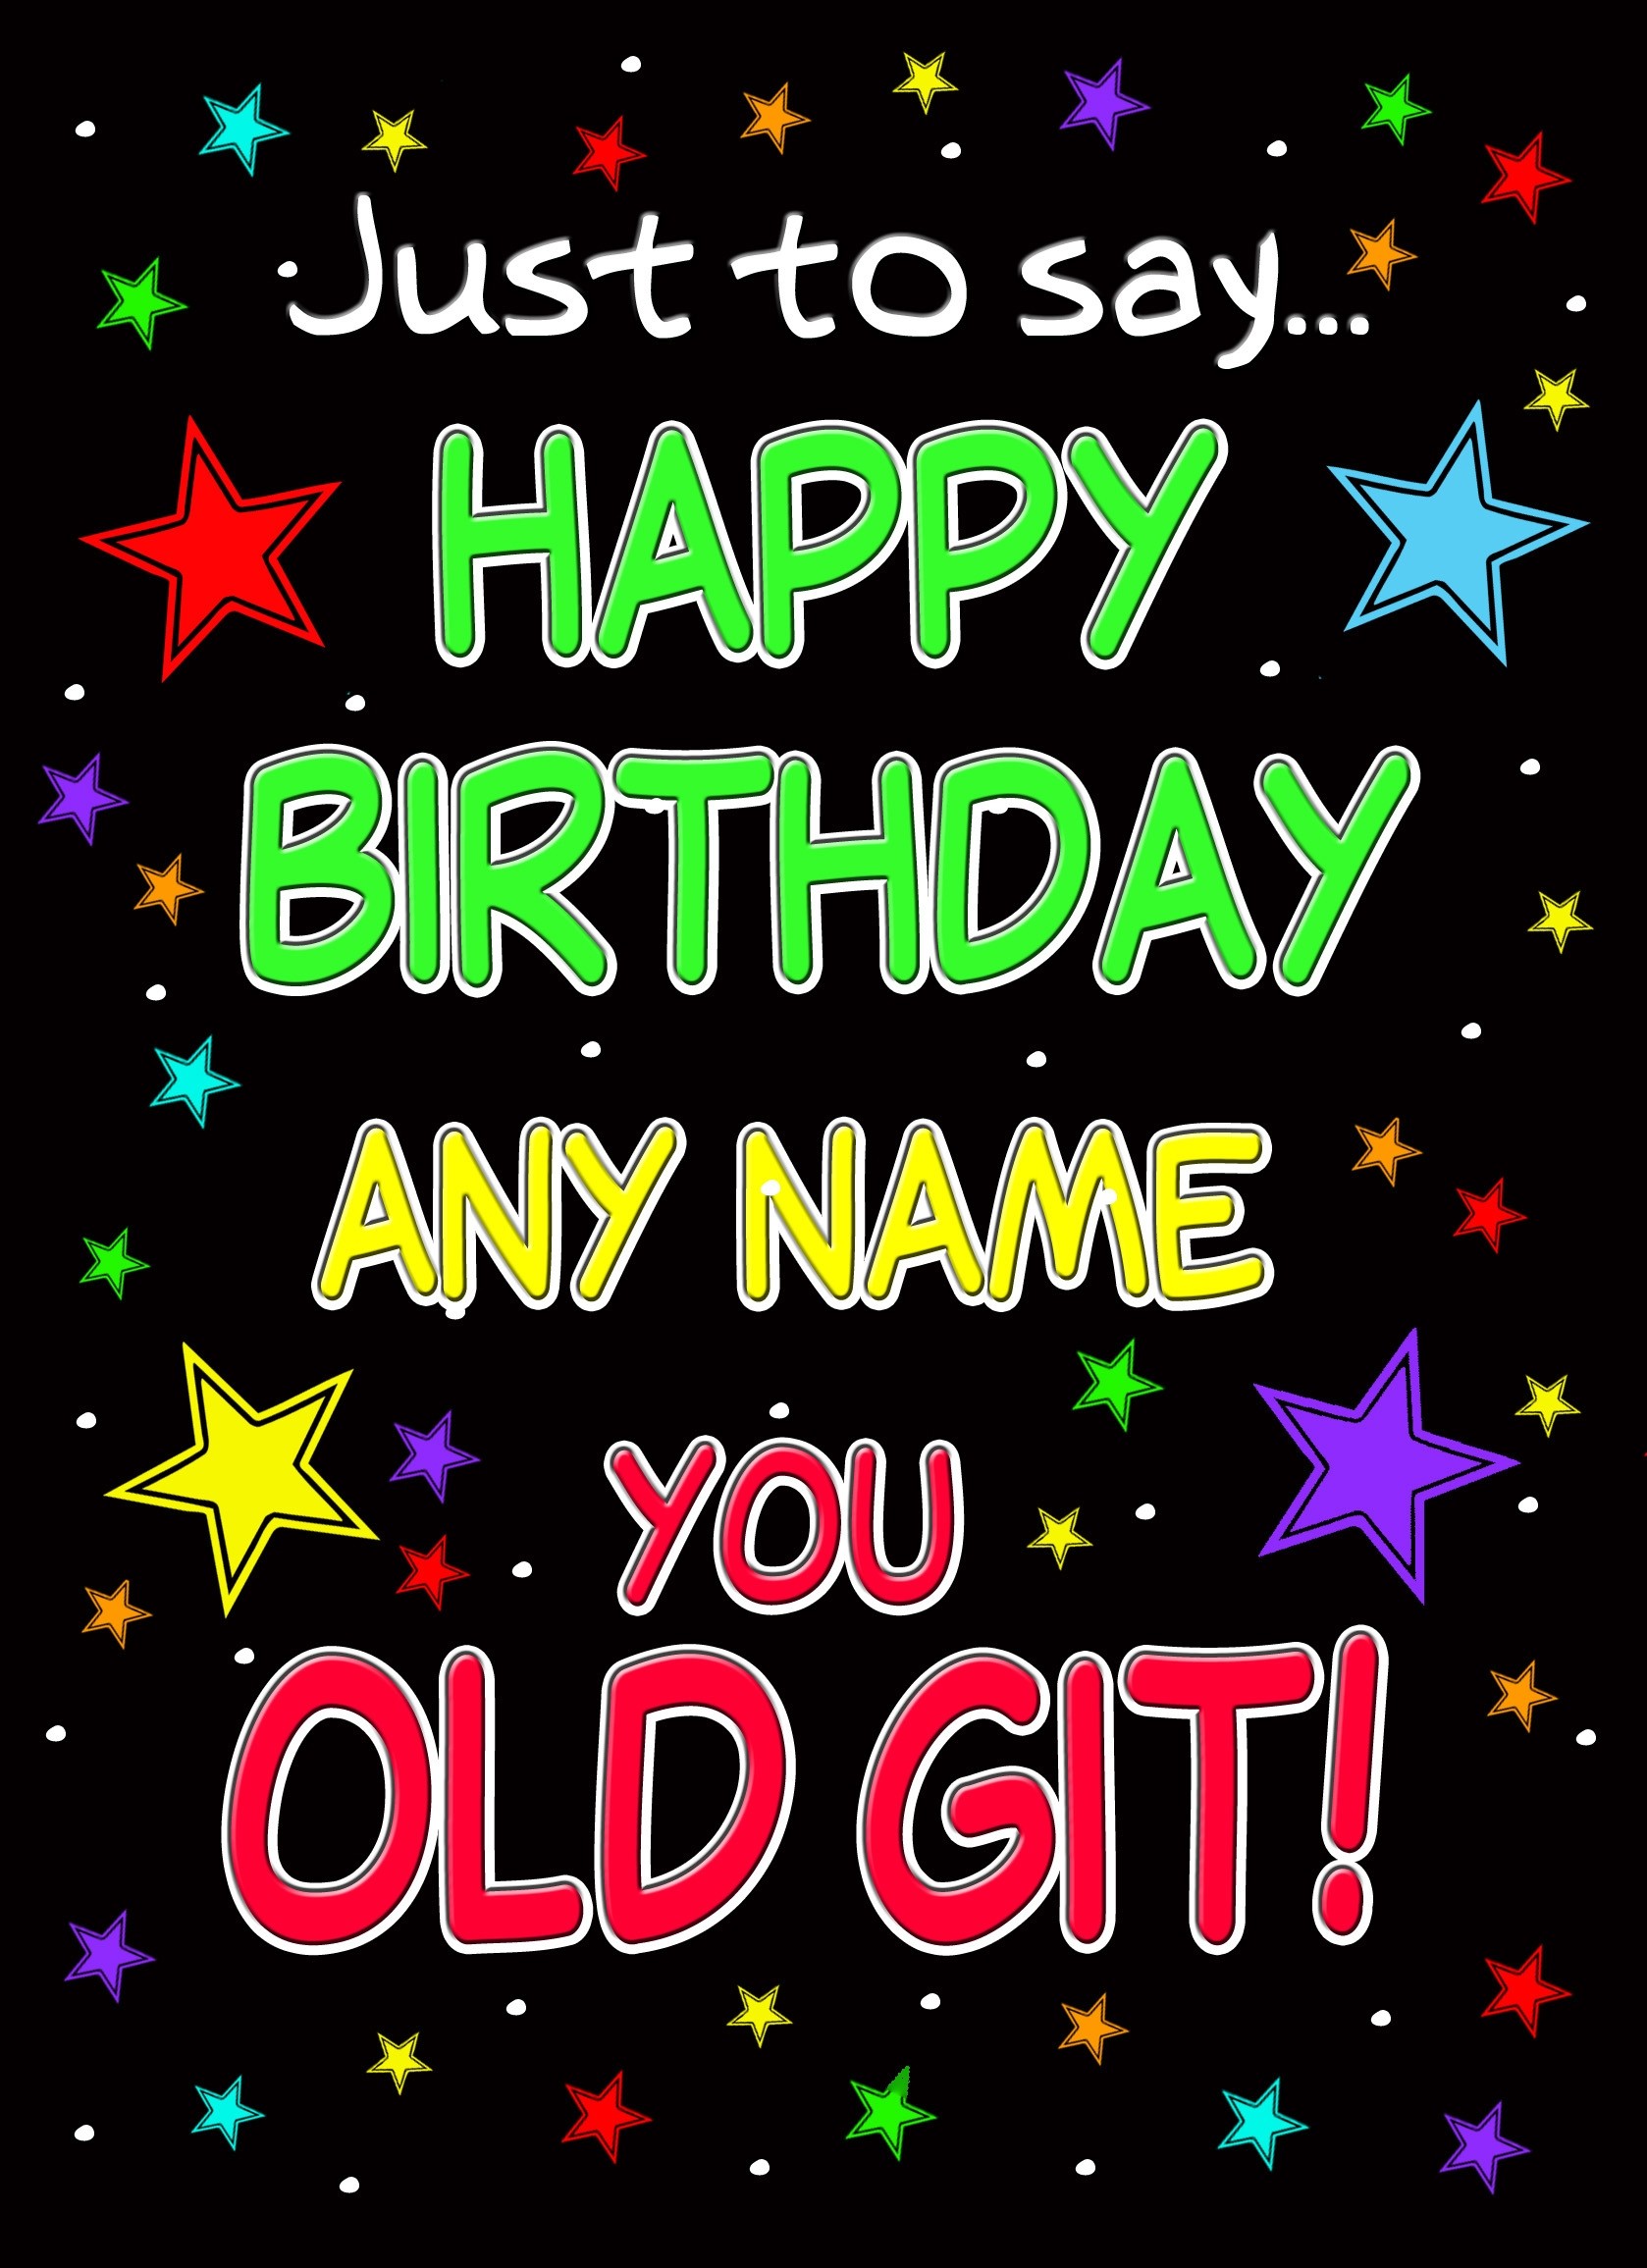 Personalised Funny Birthday Card Old Git